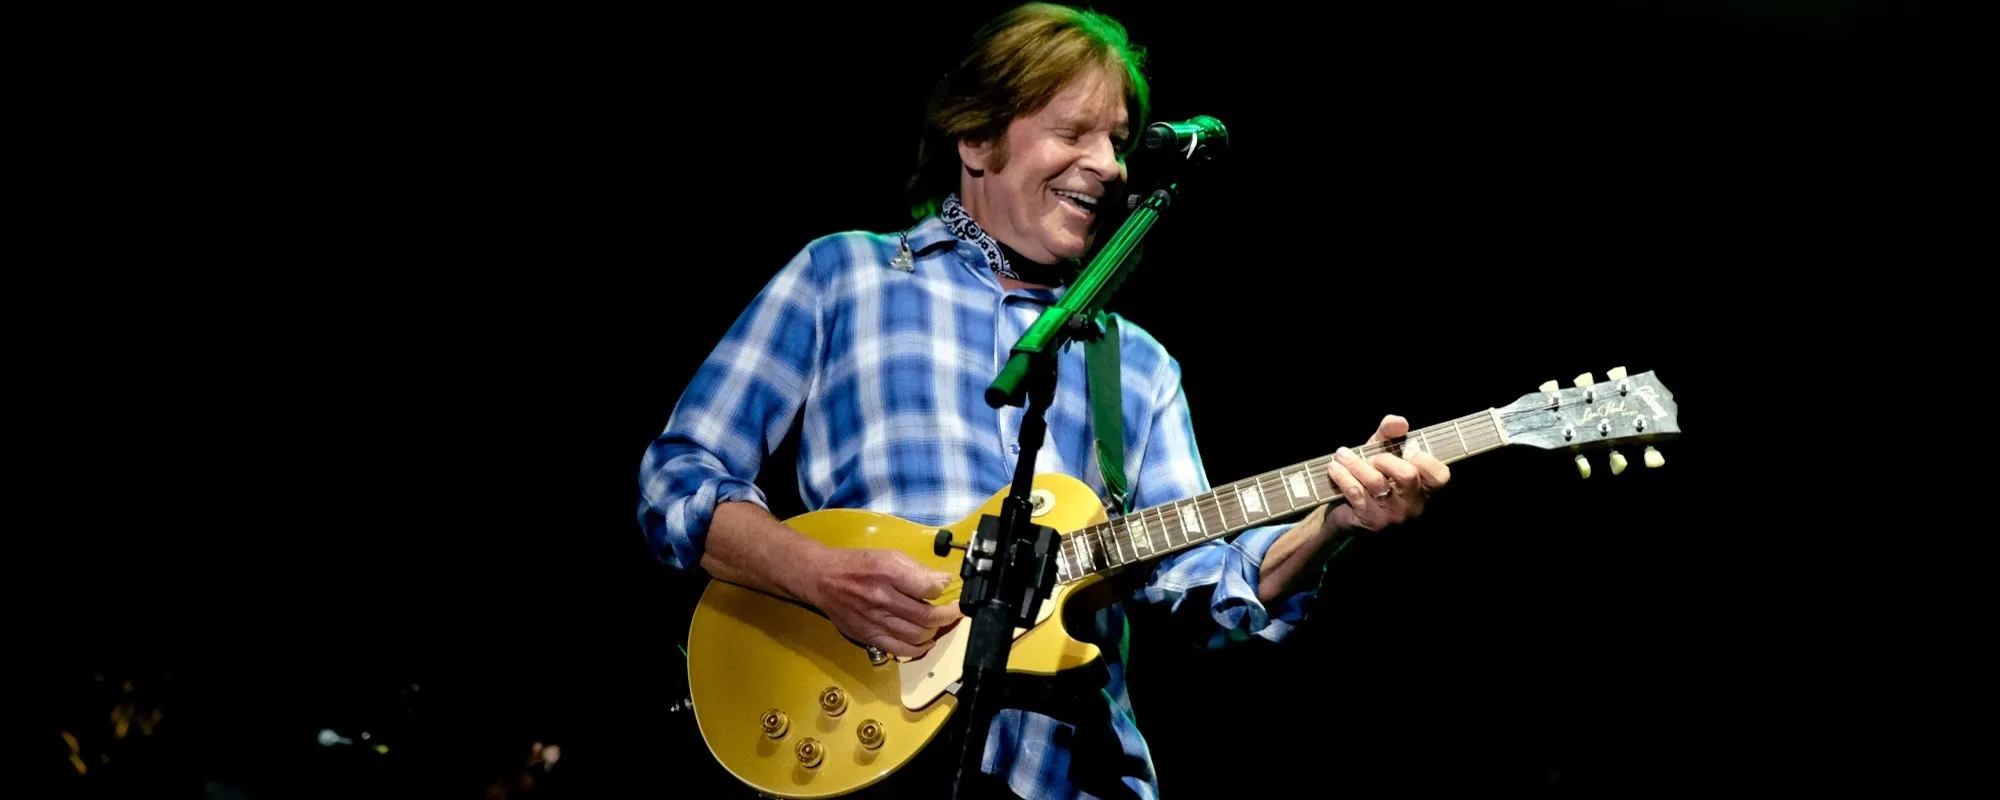 5 Fascinating Facts About John Fogerty’s Chart-Topping 1985 Solo Album, ‘Centerfield’